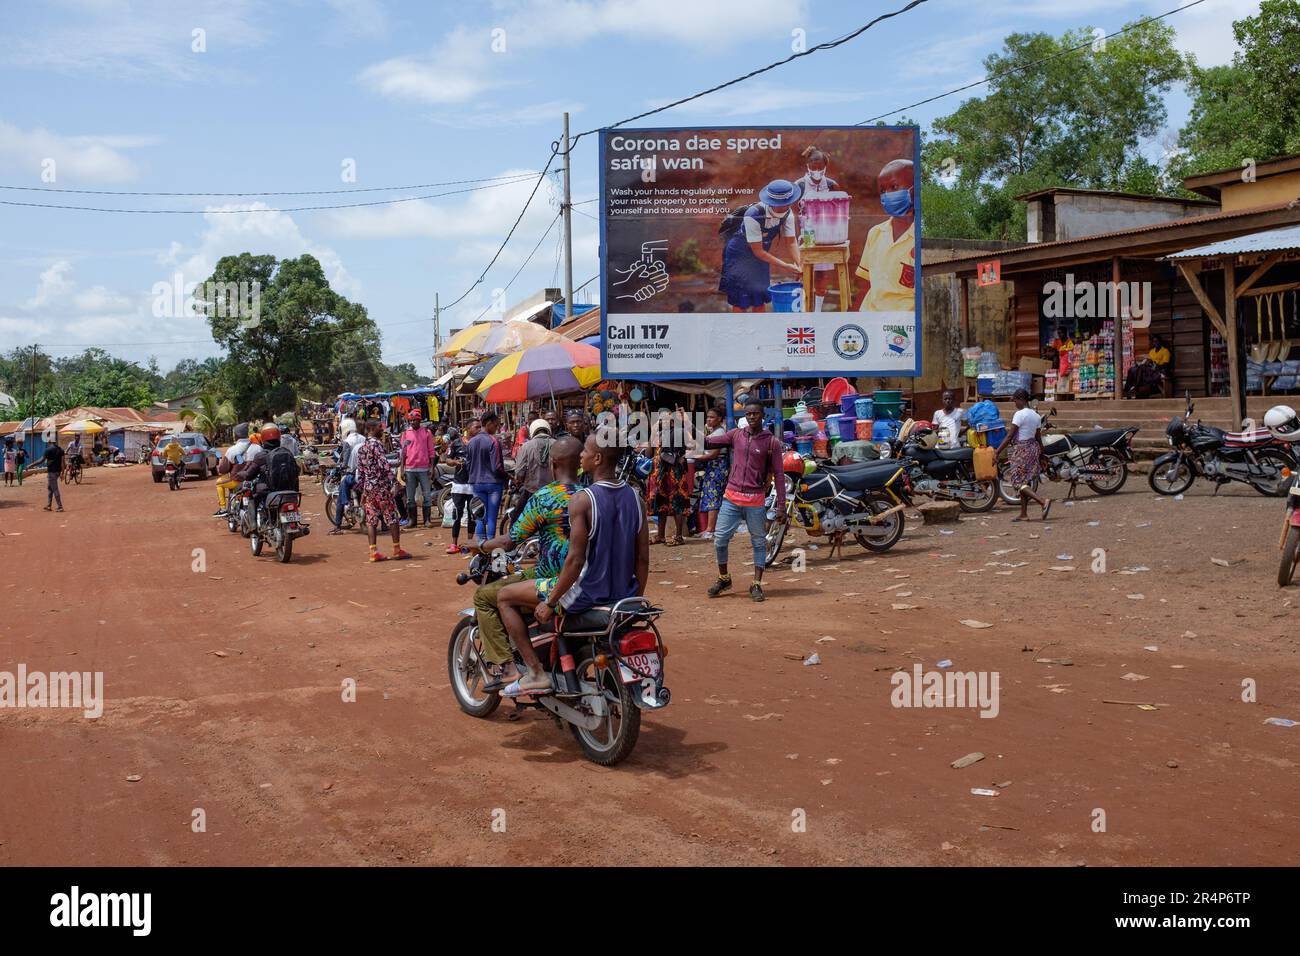 A billboard poster situated in a market in the town of Magburaka, Sierra Leone, promoting the control of Covid, and sponsored by UK Aid Stock Photo